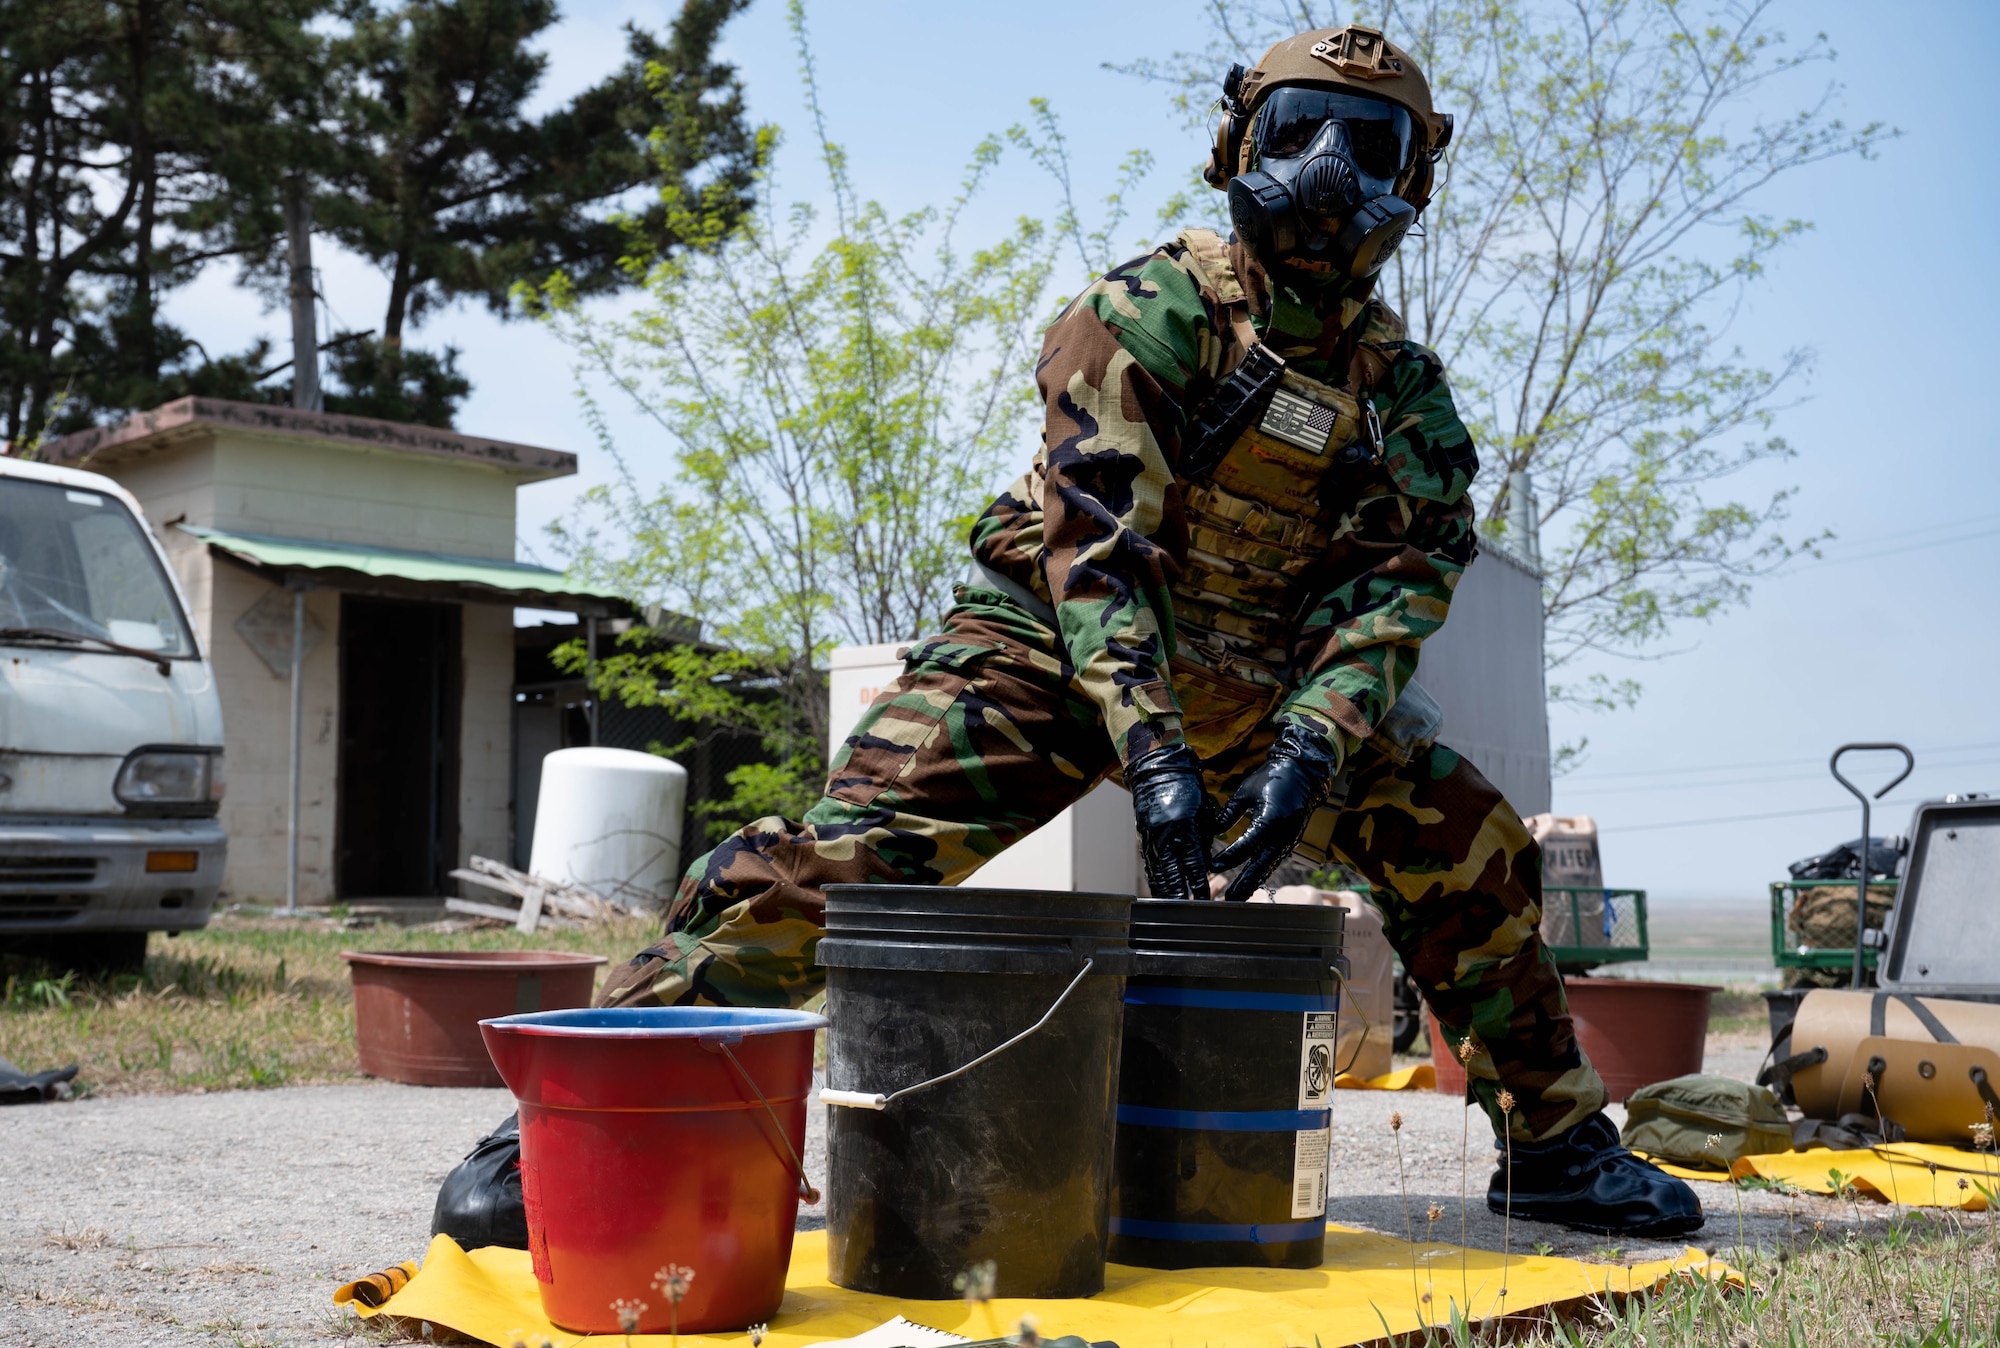 Senior Airman Charles James, 8th Civil Engineer Squadron explosive ordnance disposal technician, sanitizes his gloves during a training event at Kunsan Air Base, Republic of Korea, April 20, 2023. The EOD team members were tested on their ability to operate in a hazardous environment while wearing Mission Oriented Protective Posture gear. (U.S. Air Force photo illustration by Senior Airman Shannon Braaten)